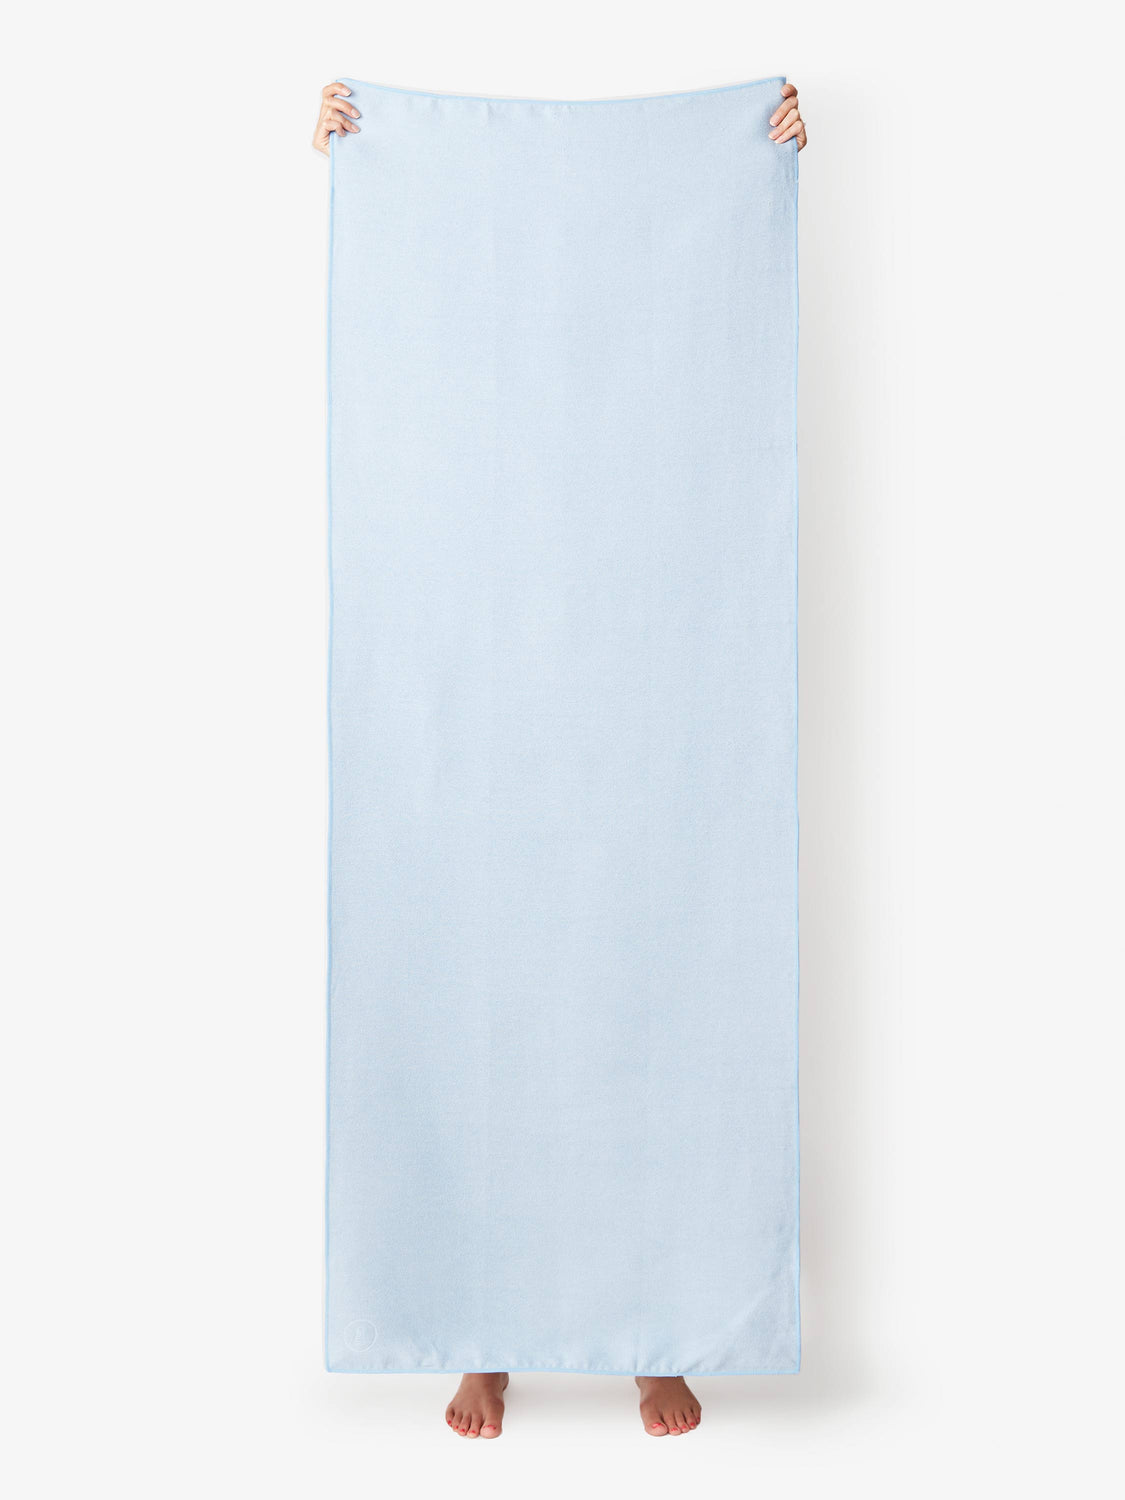 A powder blue yoga mat towel being held up by a person.